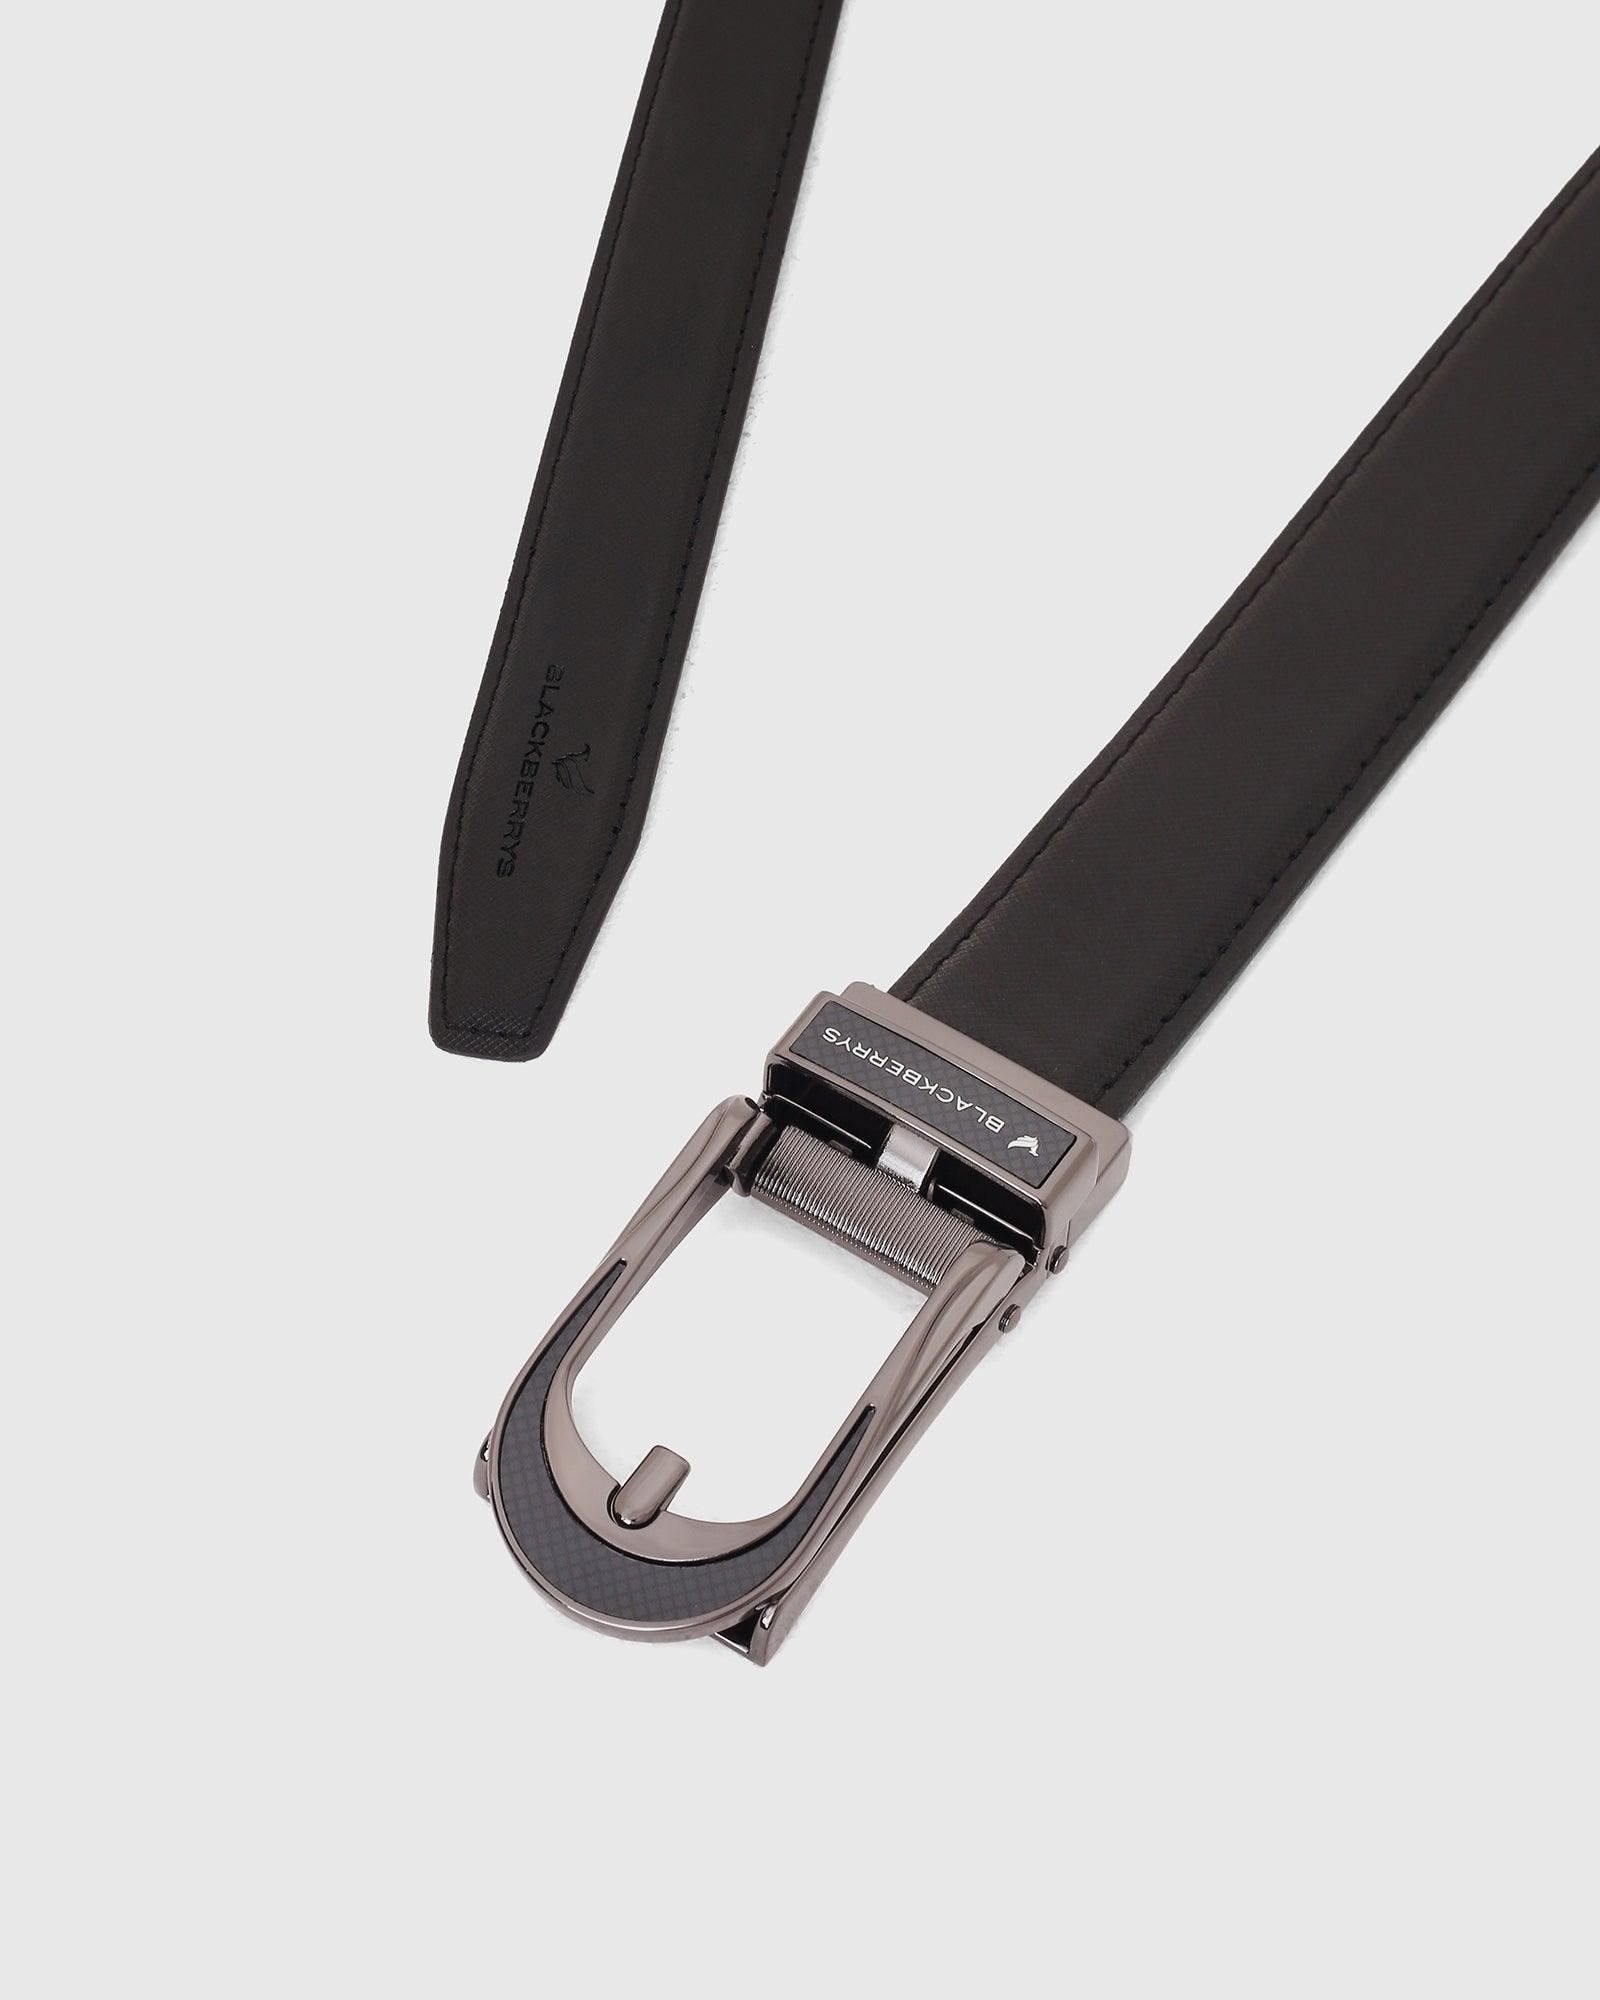 Must Haves Leather Black Textured Belt - New Galenia